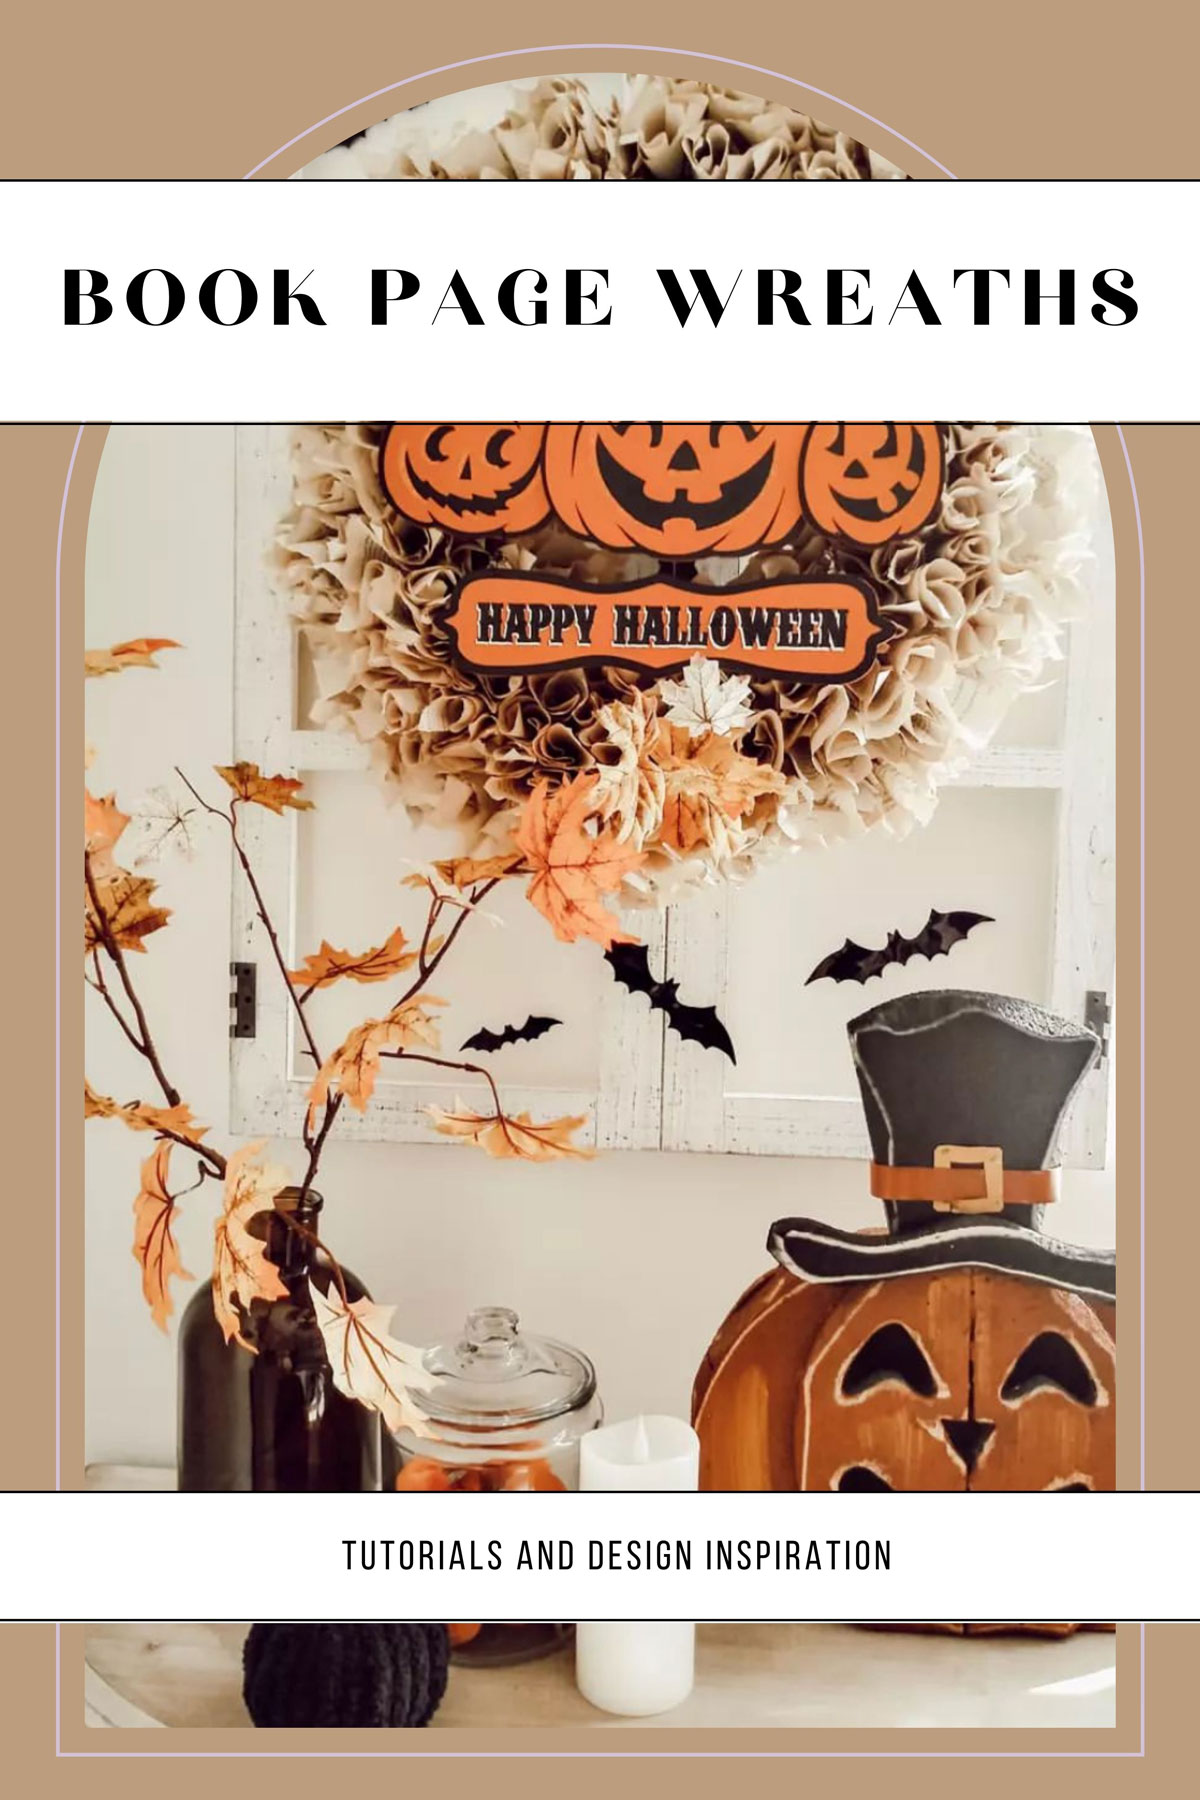 halloween themed book page wreath idea with jack-o-lanterns